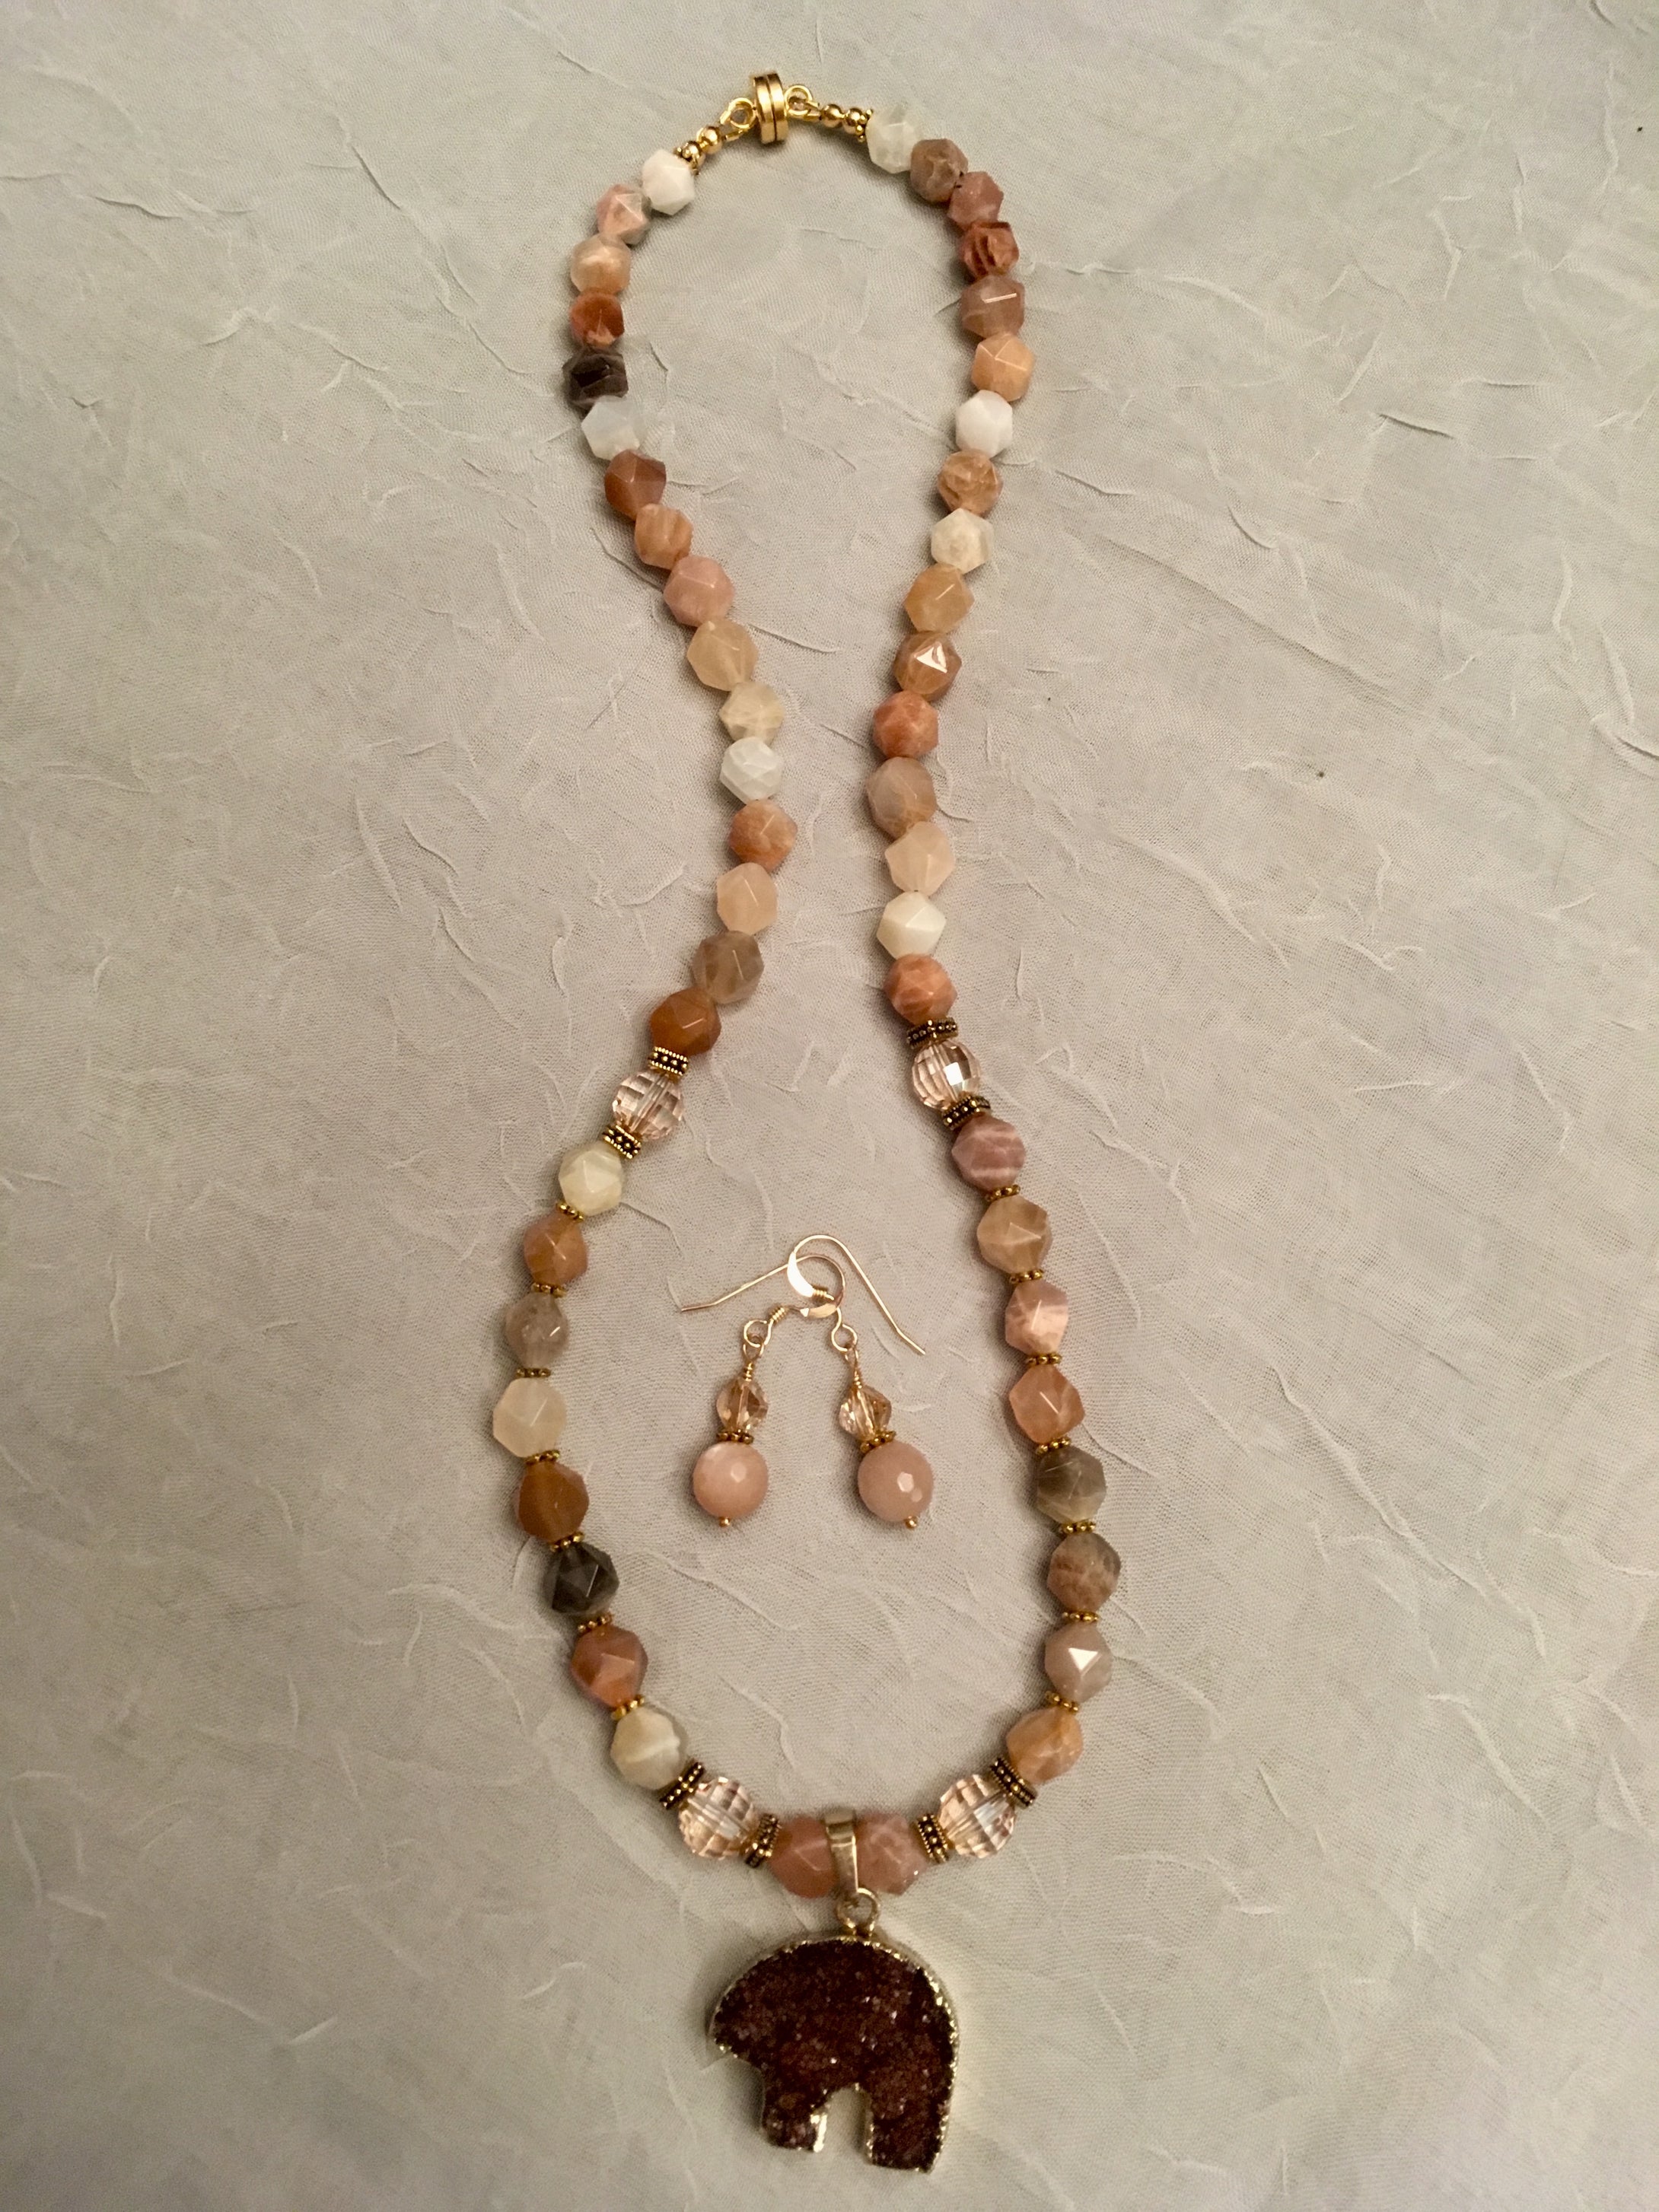 Peach Moonstone, Swarovski Crystals, Plated Gold with Druzy Pendant 19